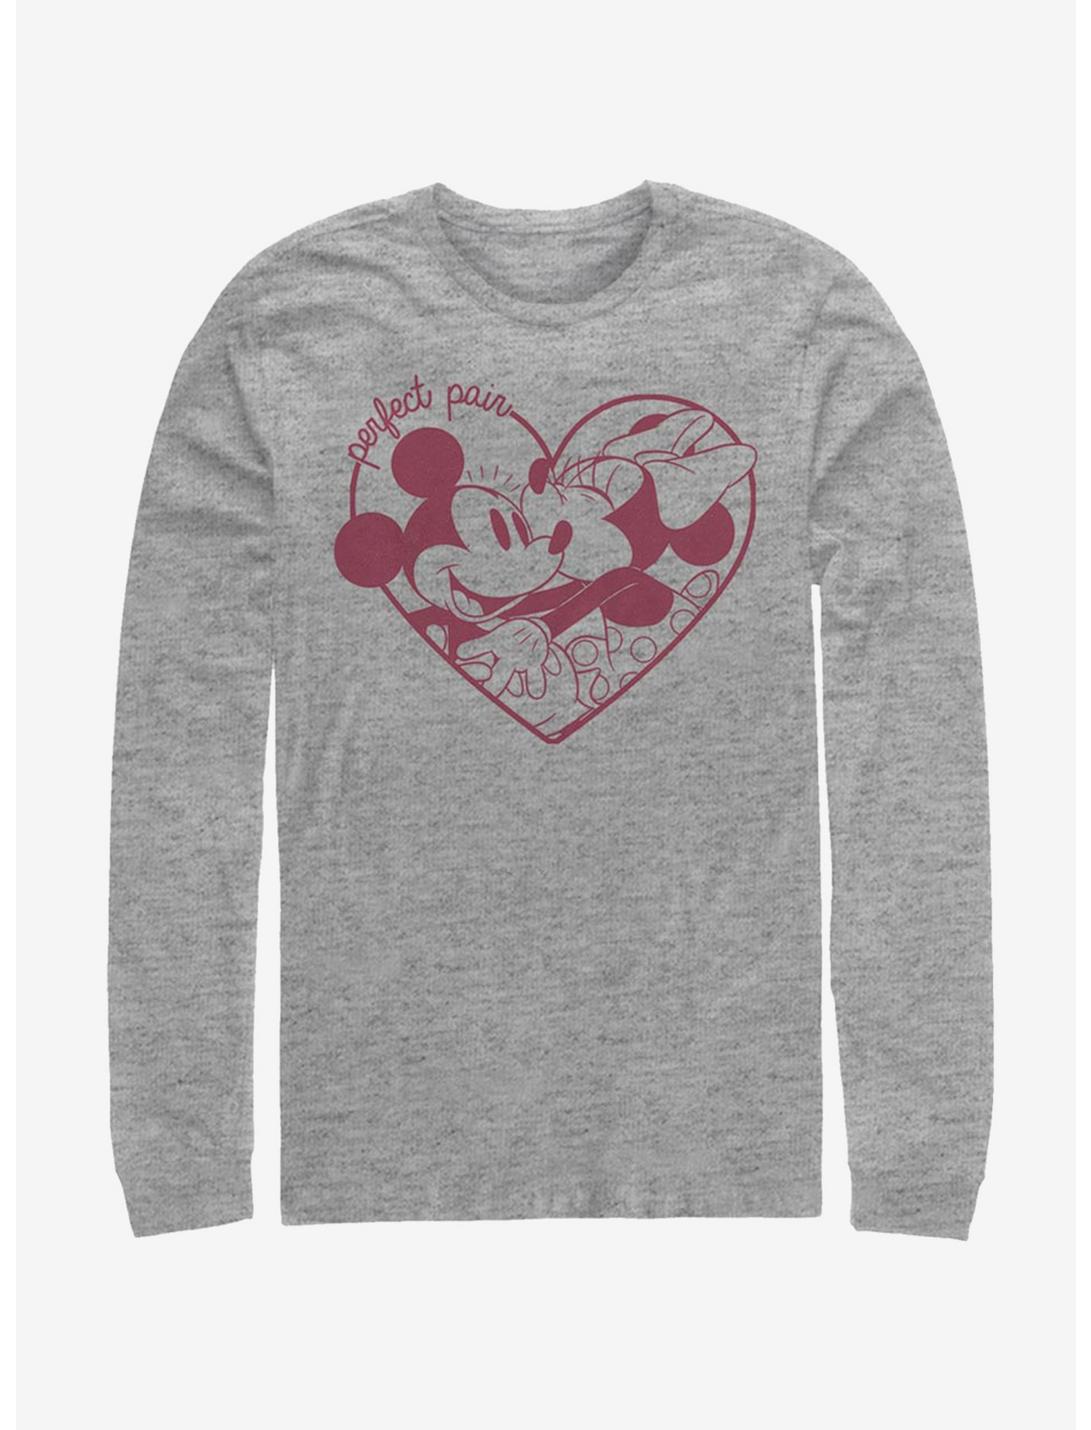 Disney Mickey Mouse & Minnie Mouse Perfect Pair Long-Sleeve T-Shirt, ATH HTR, hi-res